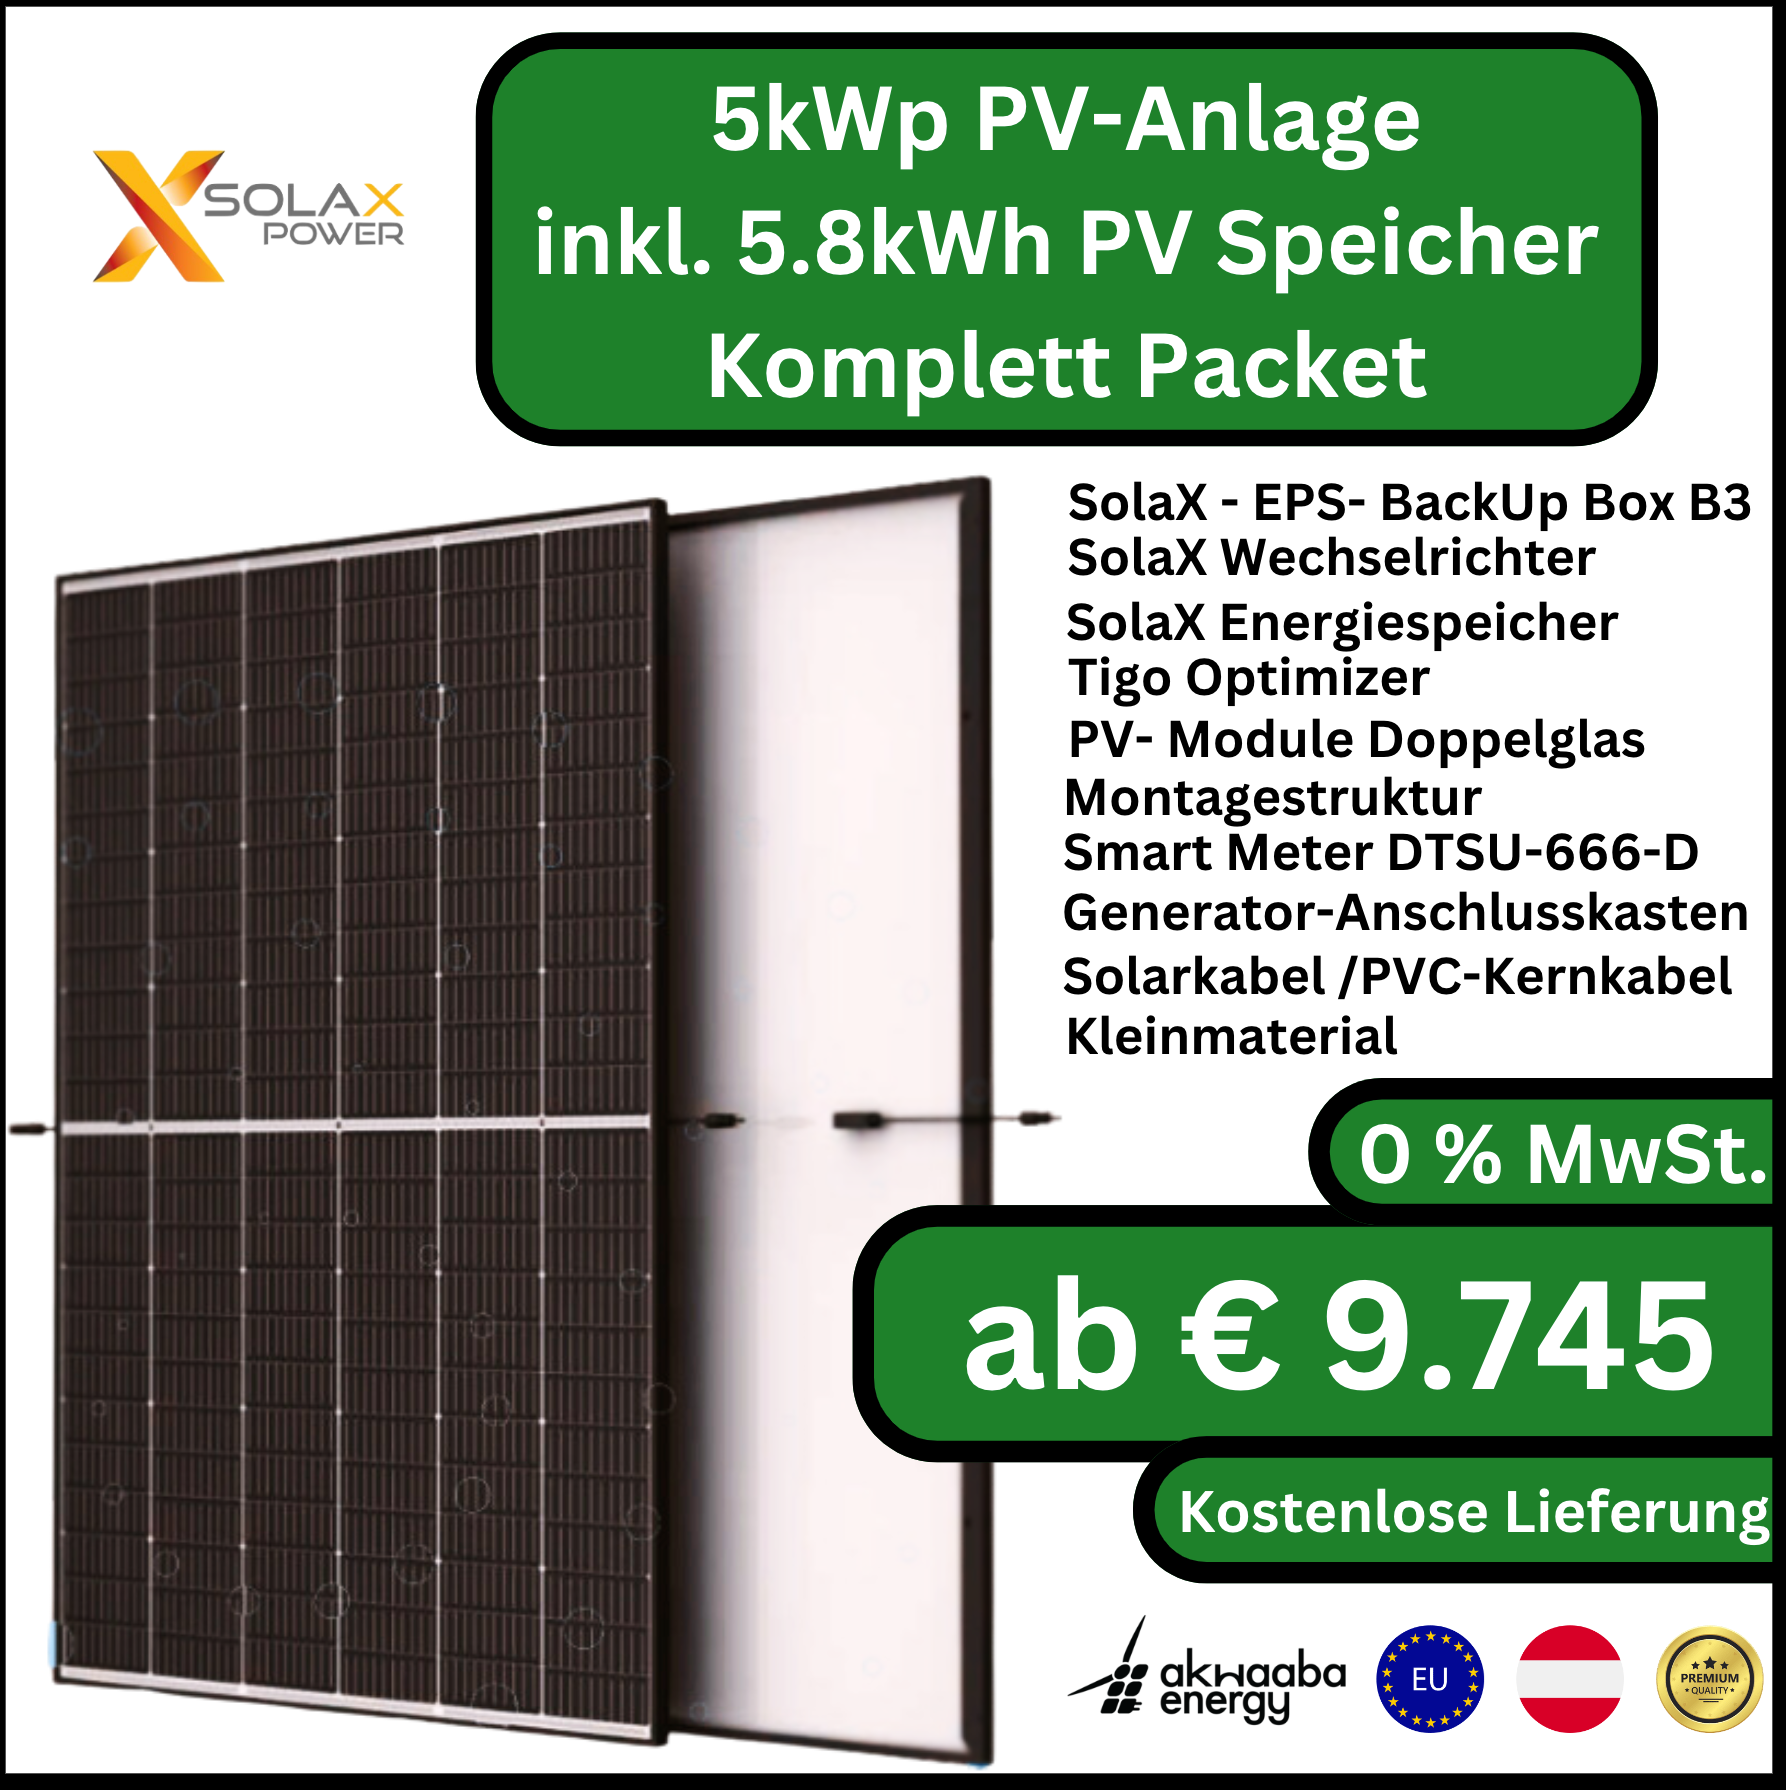 SOLAX Complete PV Set- [5kW + 5.8kWh]